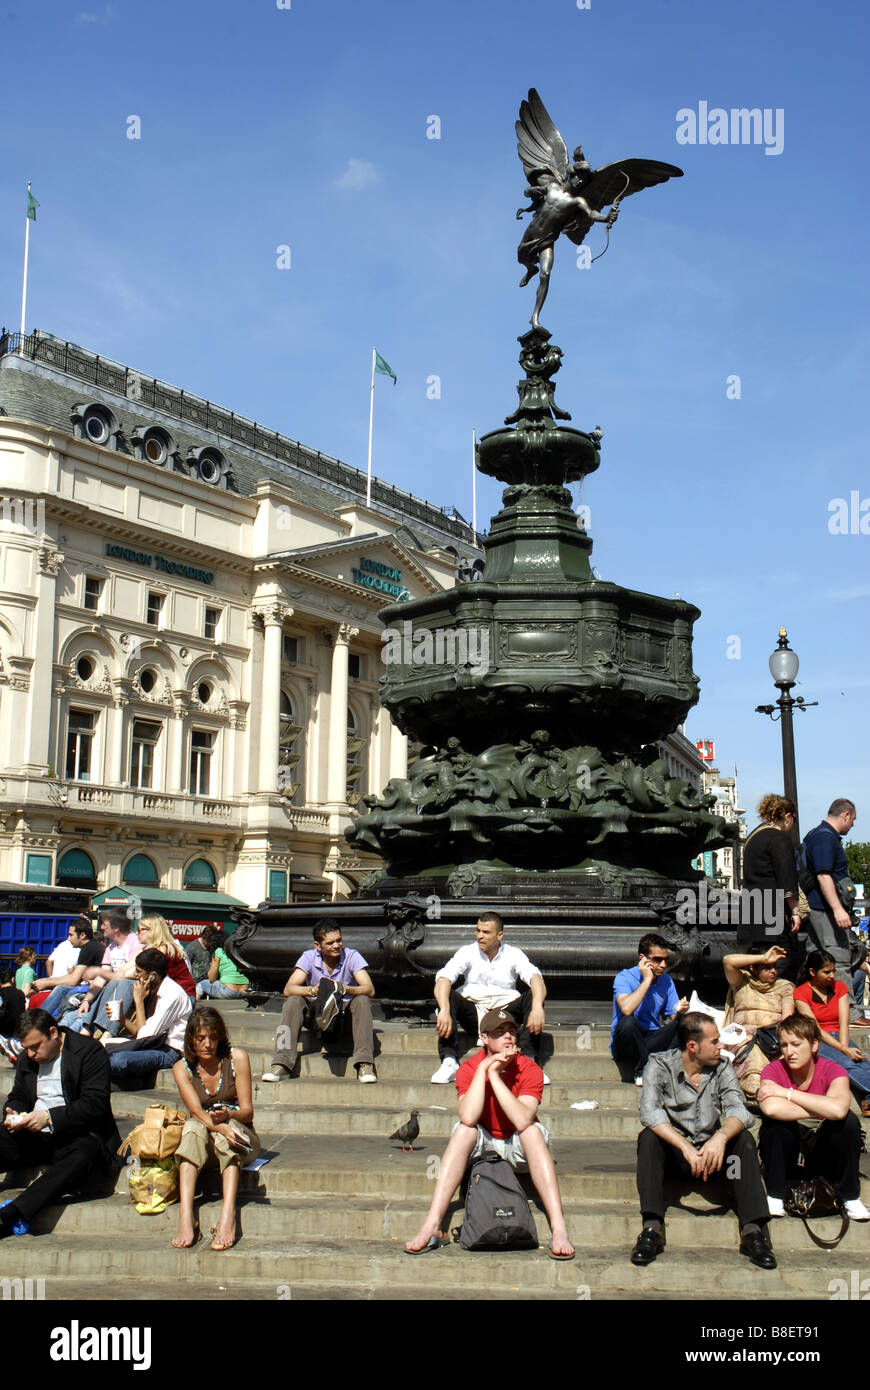 Tourists sitting on the steps around the  Bronze Statue Of  Eros, Piccadilly Cicus, London, England. Monument erected 1893 Stock Photo